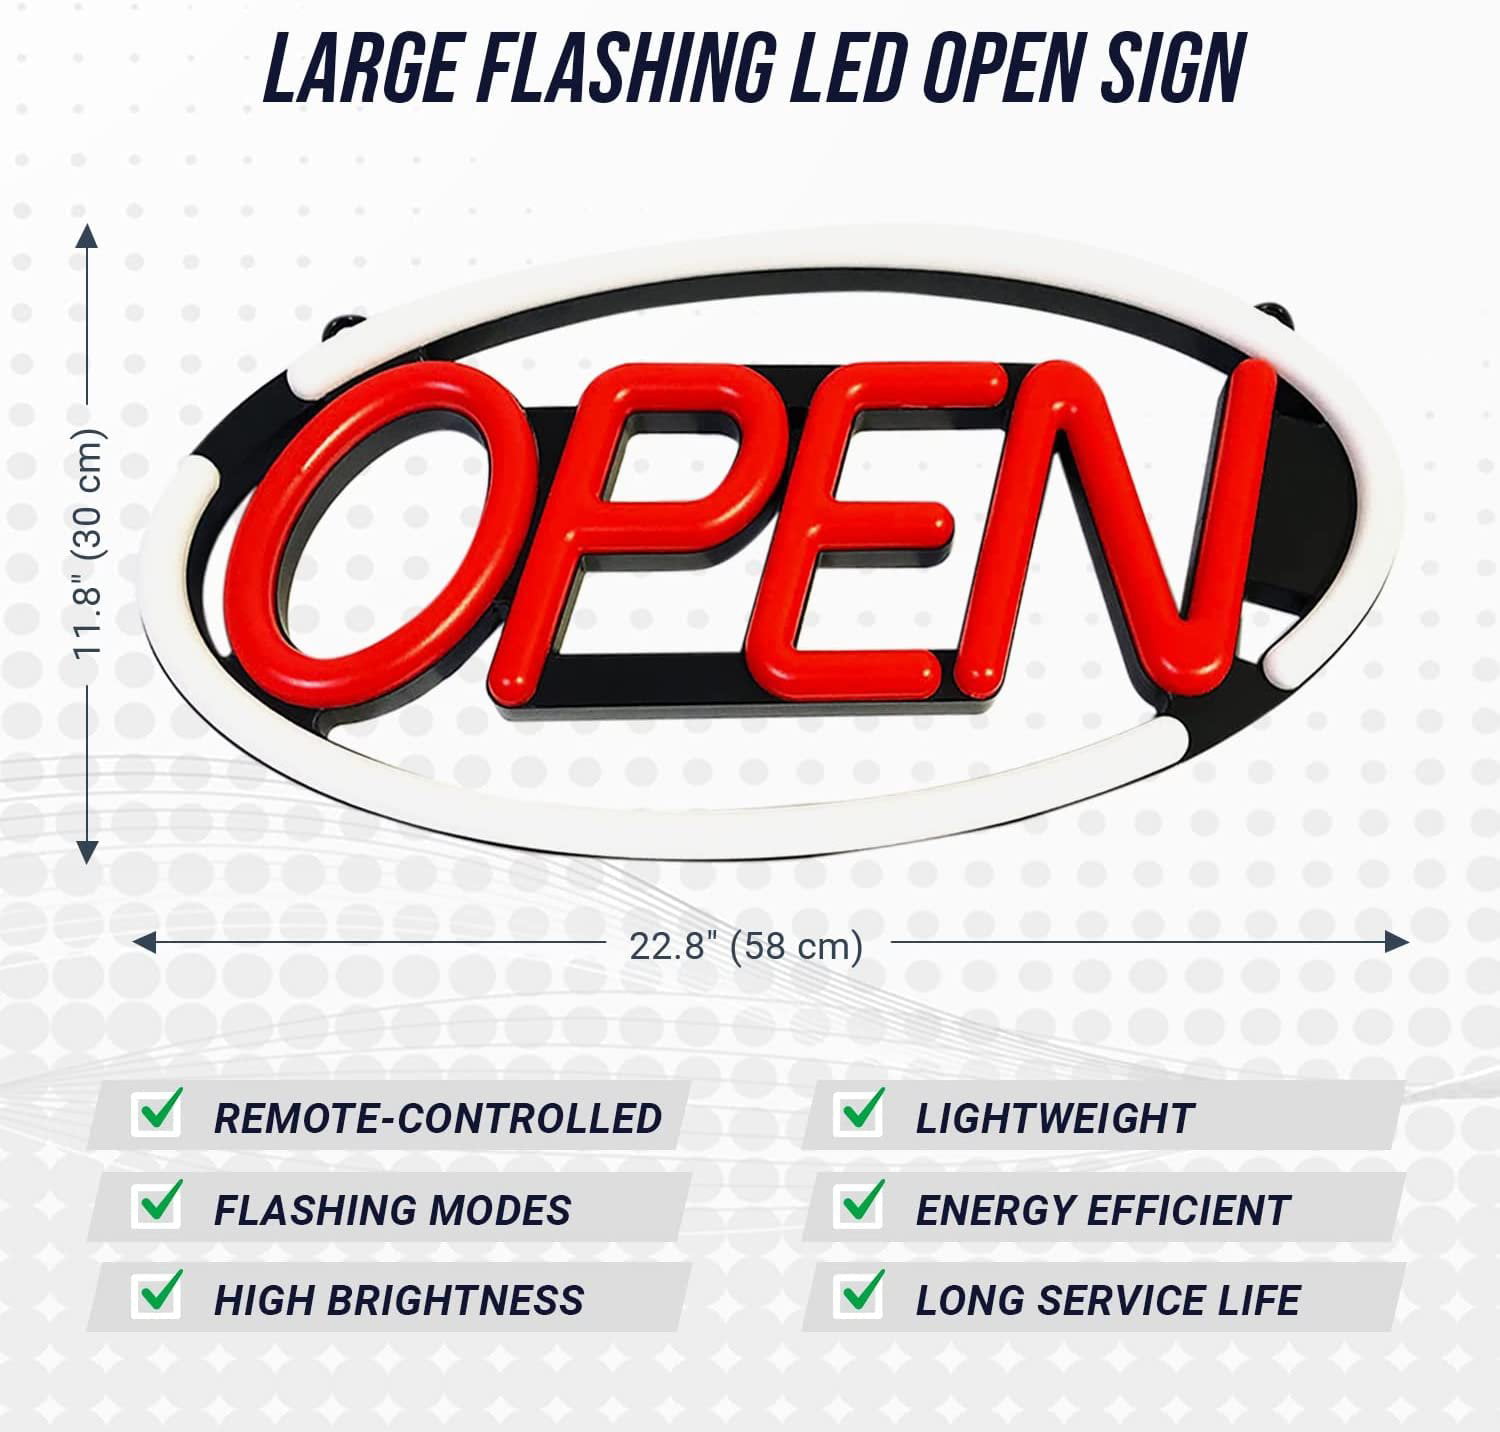 for Restaurants Offices Retail Shops Windows Storefront Extra Bright Lightweight & Energy Efficient White-Red Large Flashing LED Neon Open Sign Light for Businesses with Remote Control 